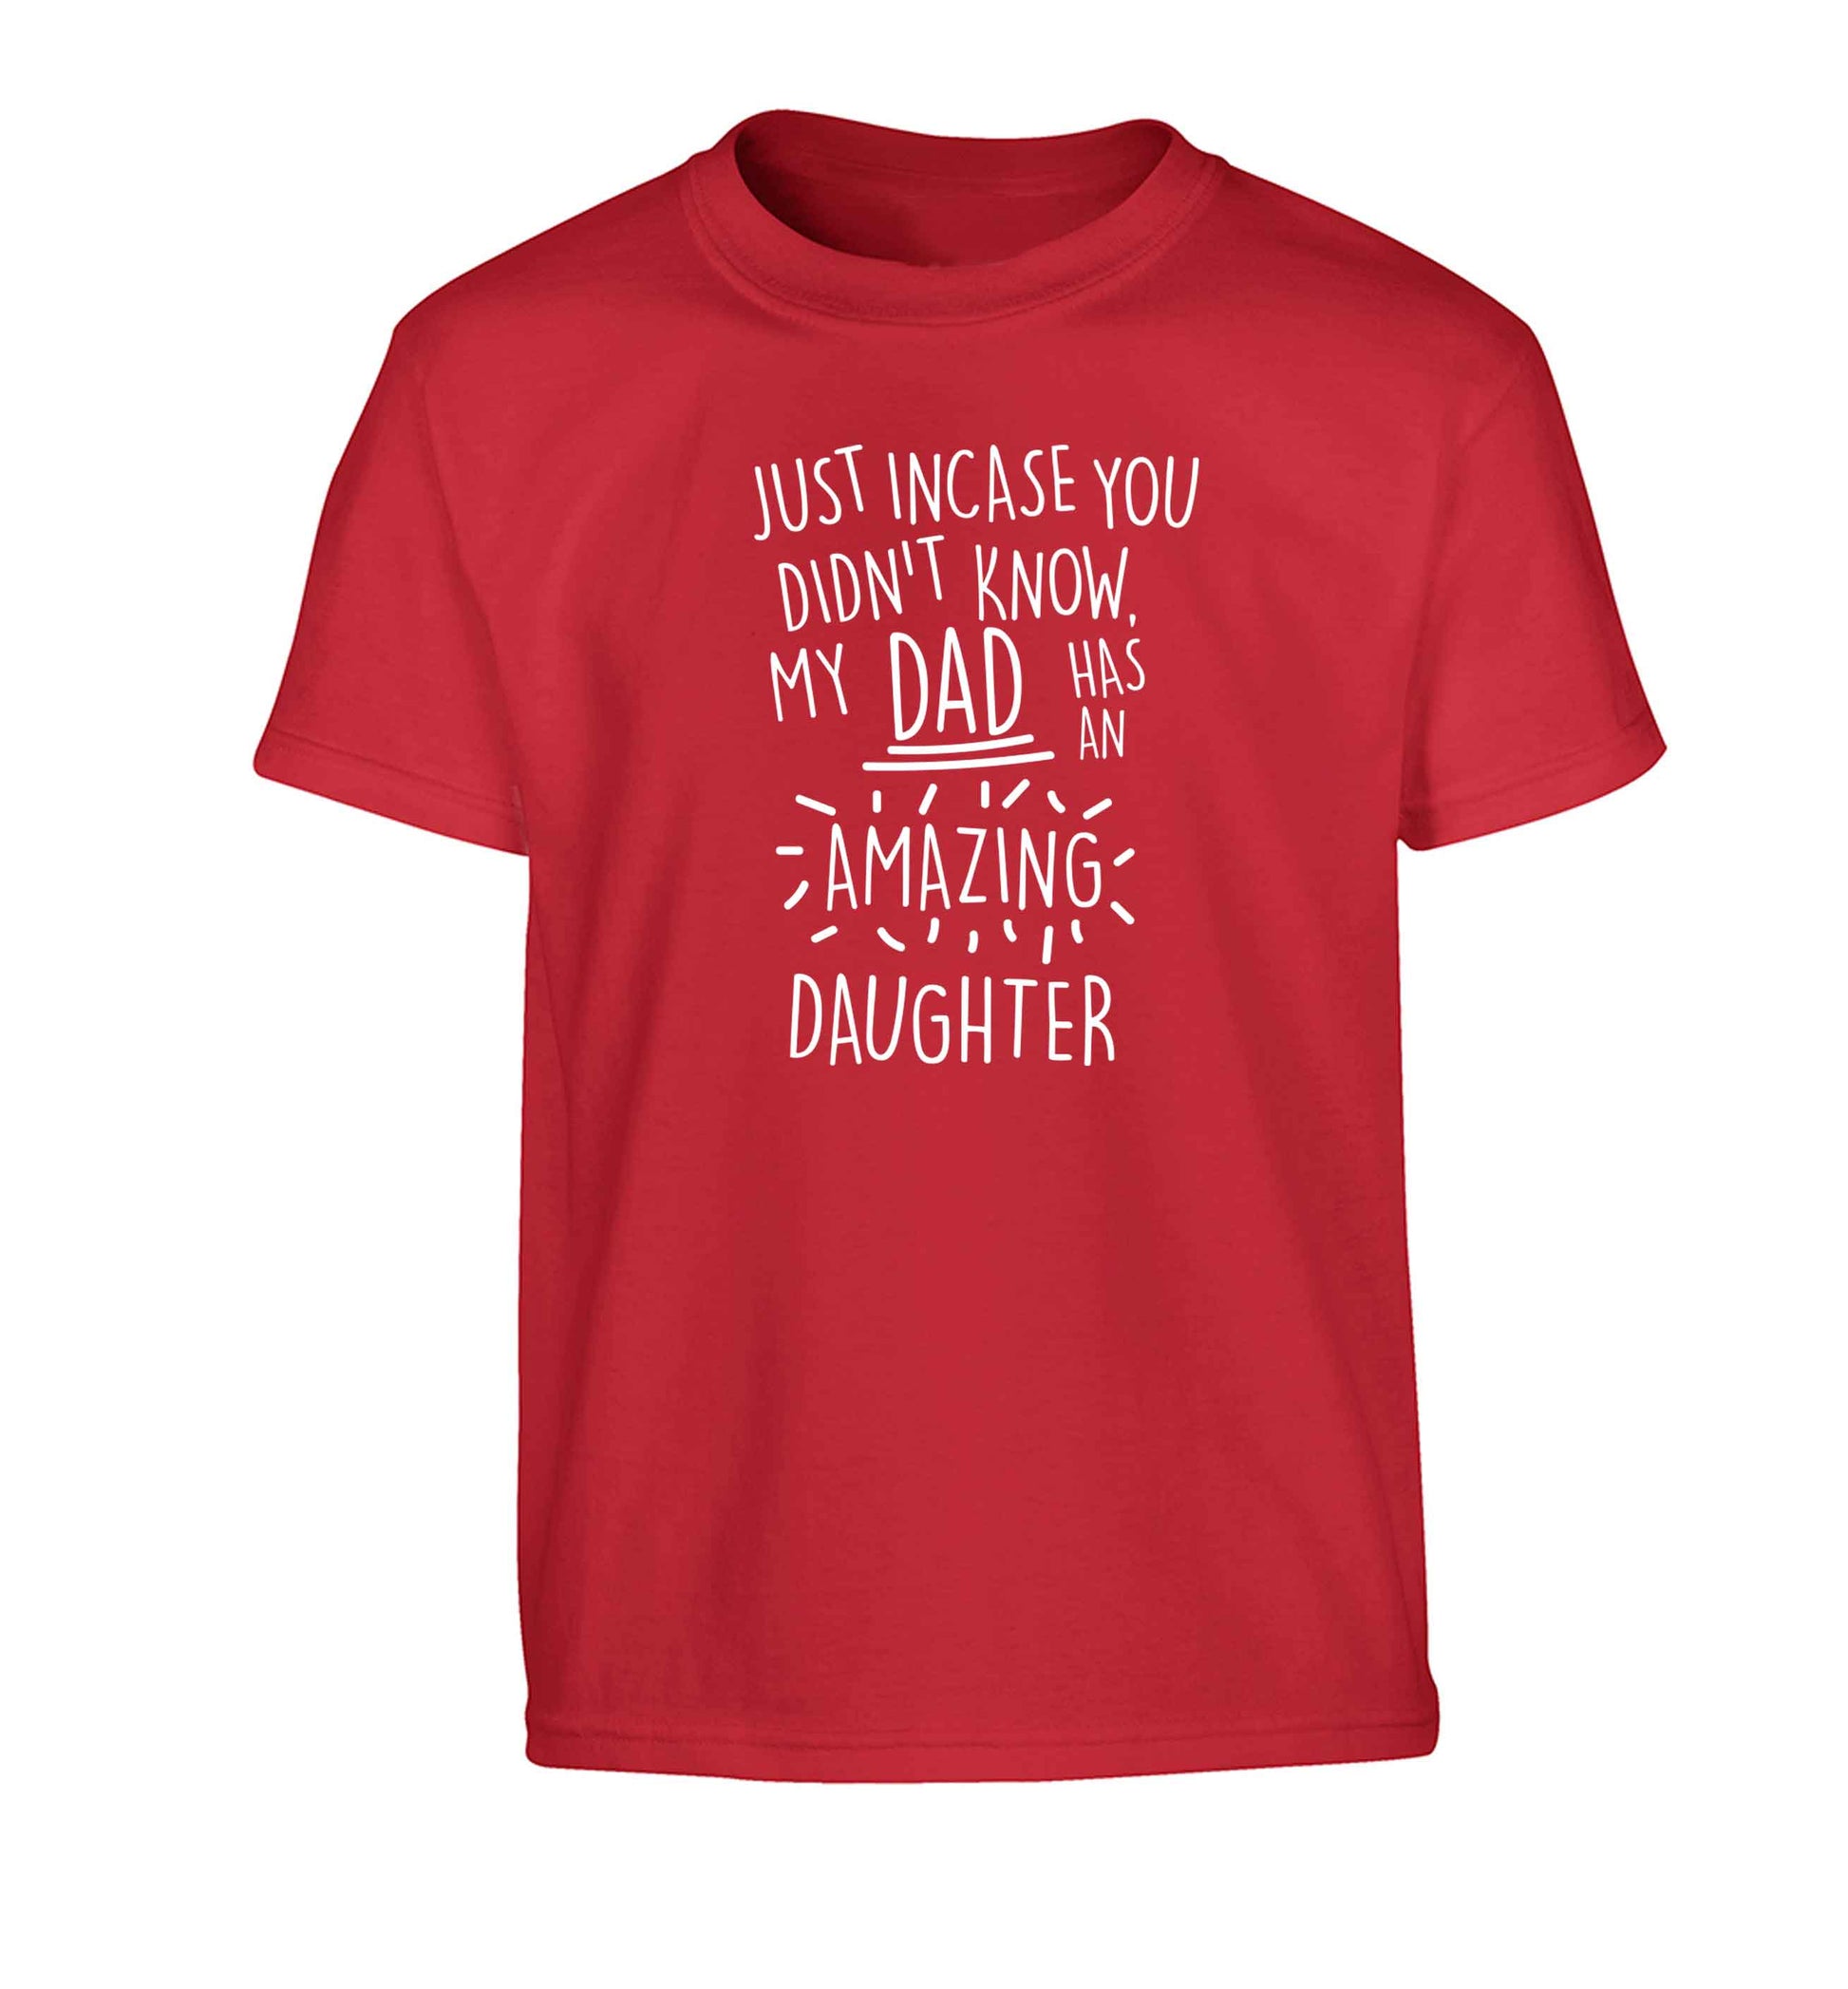 Just incase you didn't know my dad has an amazing daughter Children's red Tshirt 12-13 Years